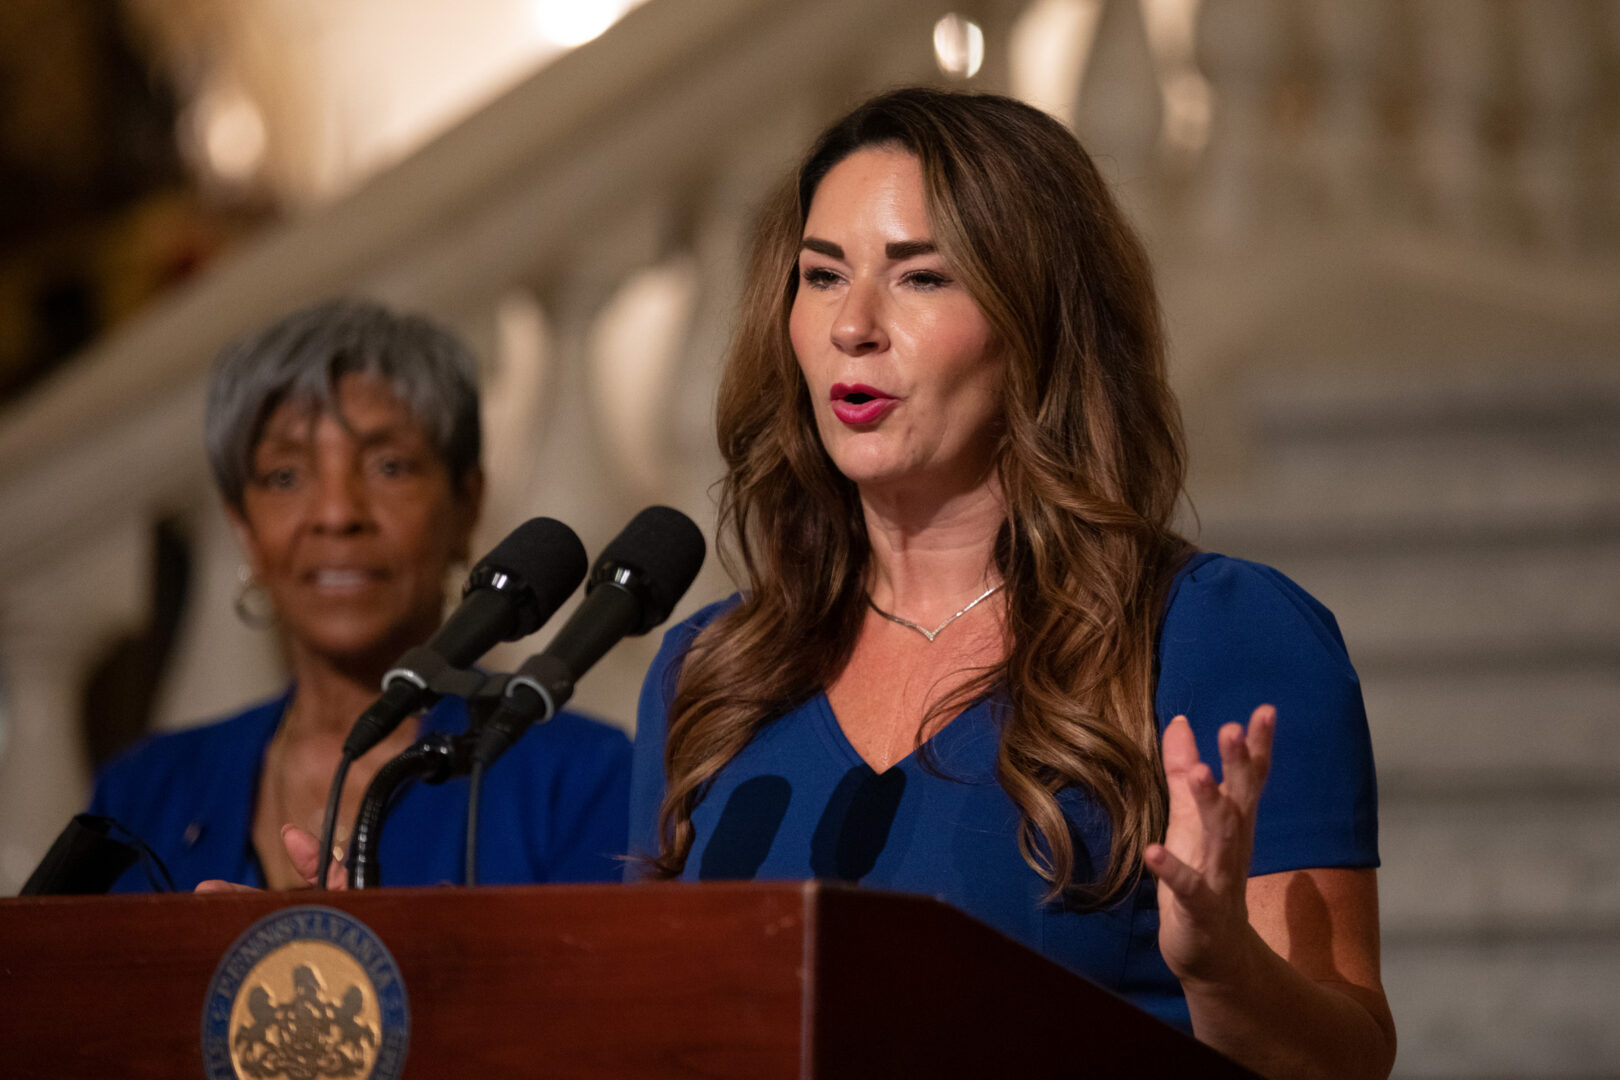 Department of Labor & IndustrySecretary Jennifer Berrier joins labor leaders and Democratic state legislators at a press conference in Harrisburg on Aug. 31, 2022.